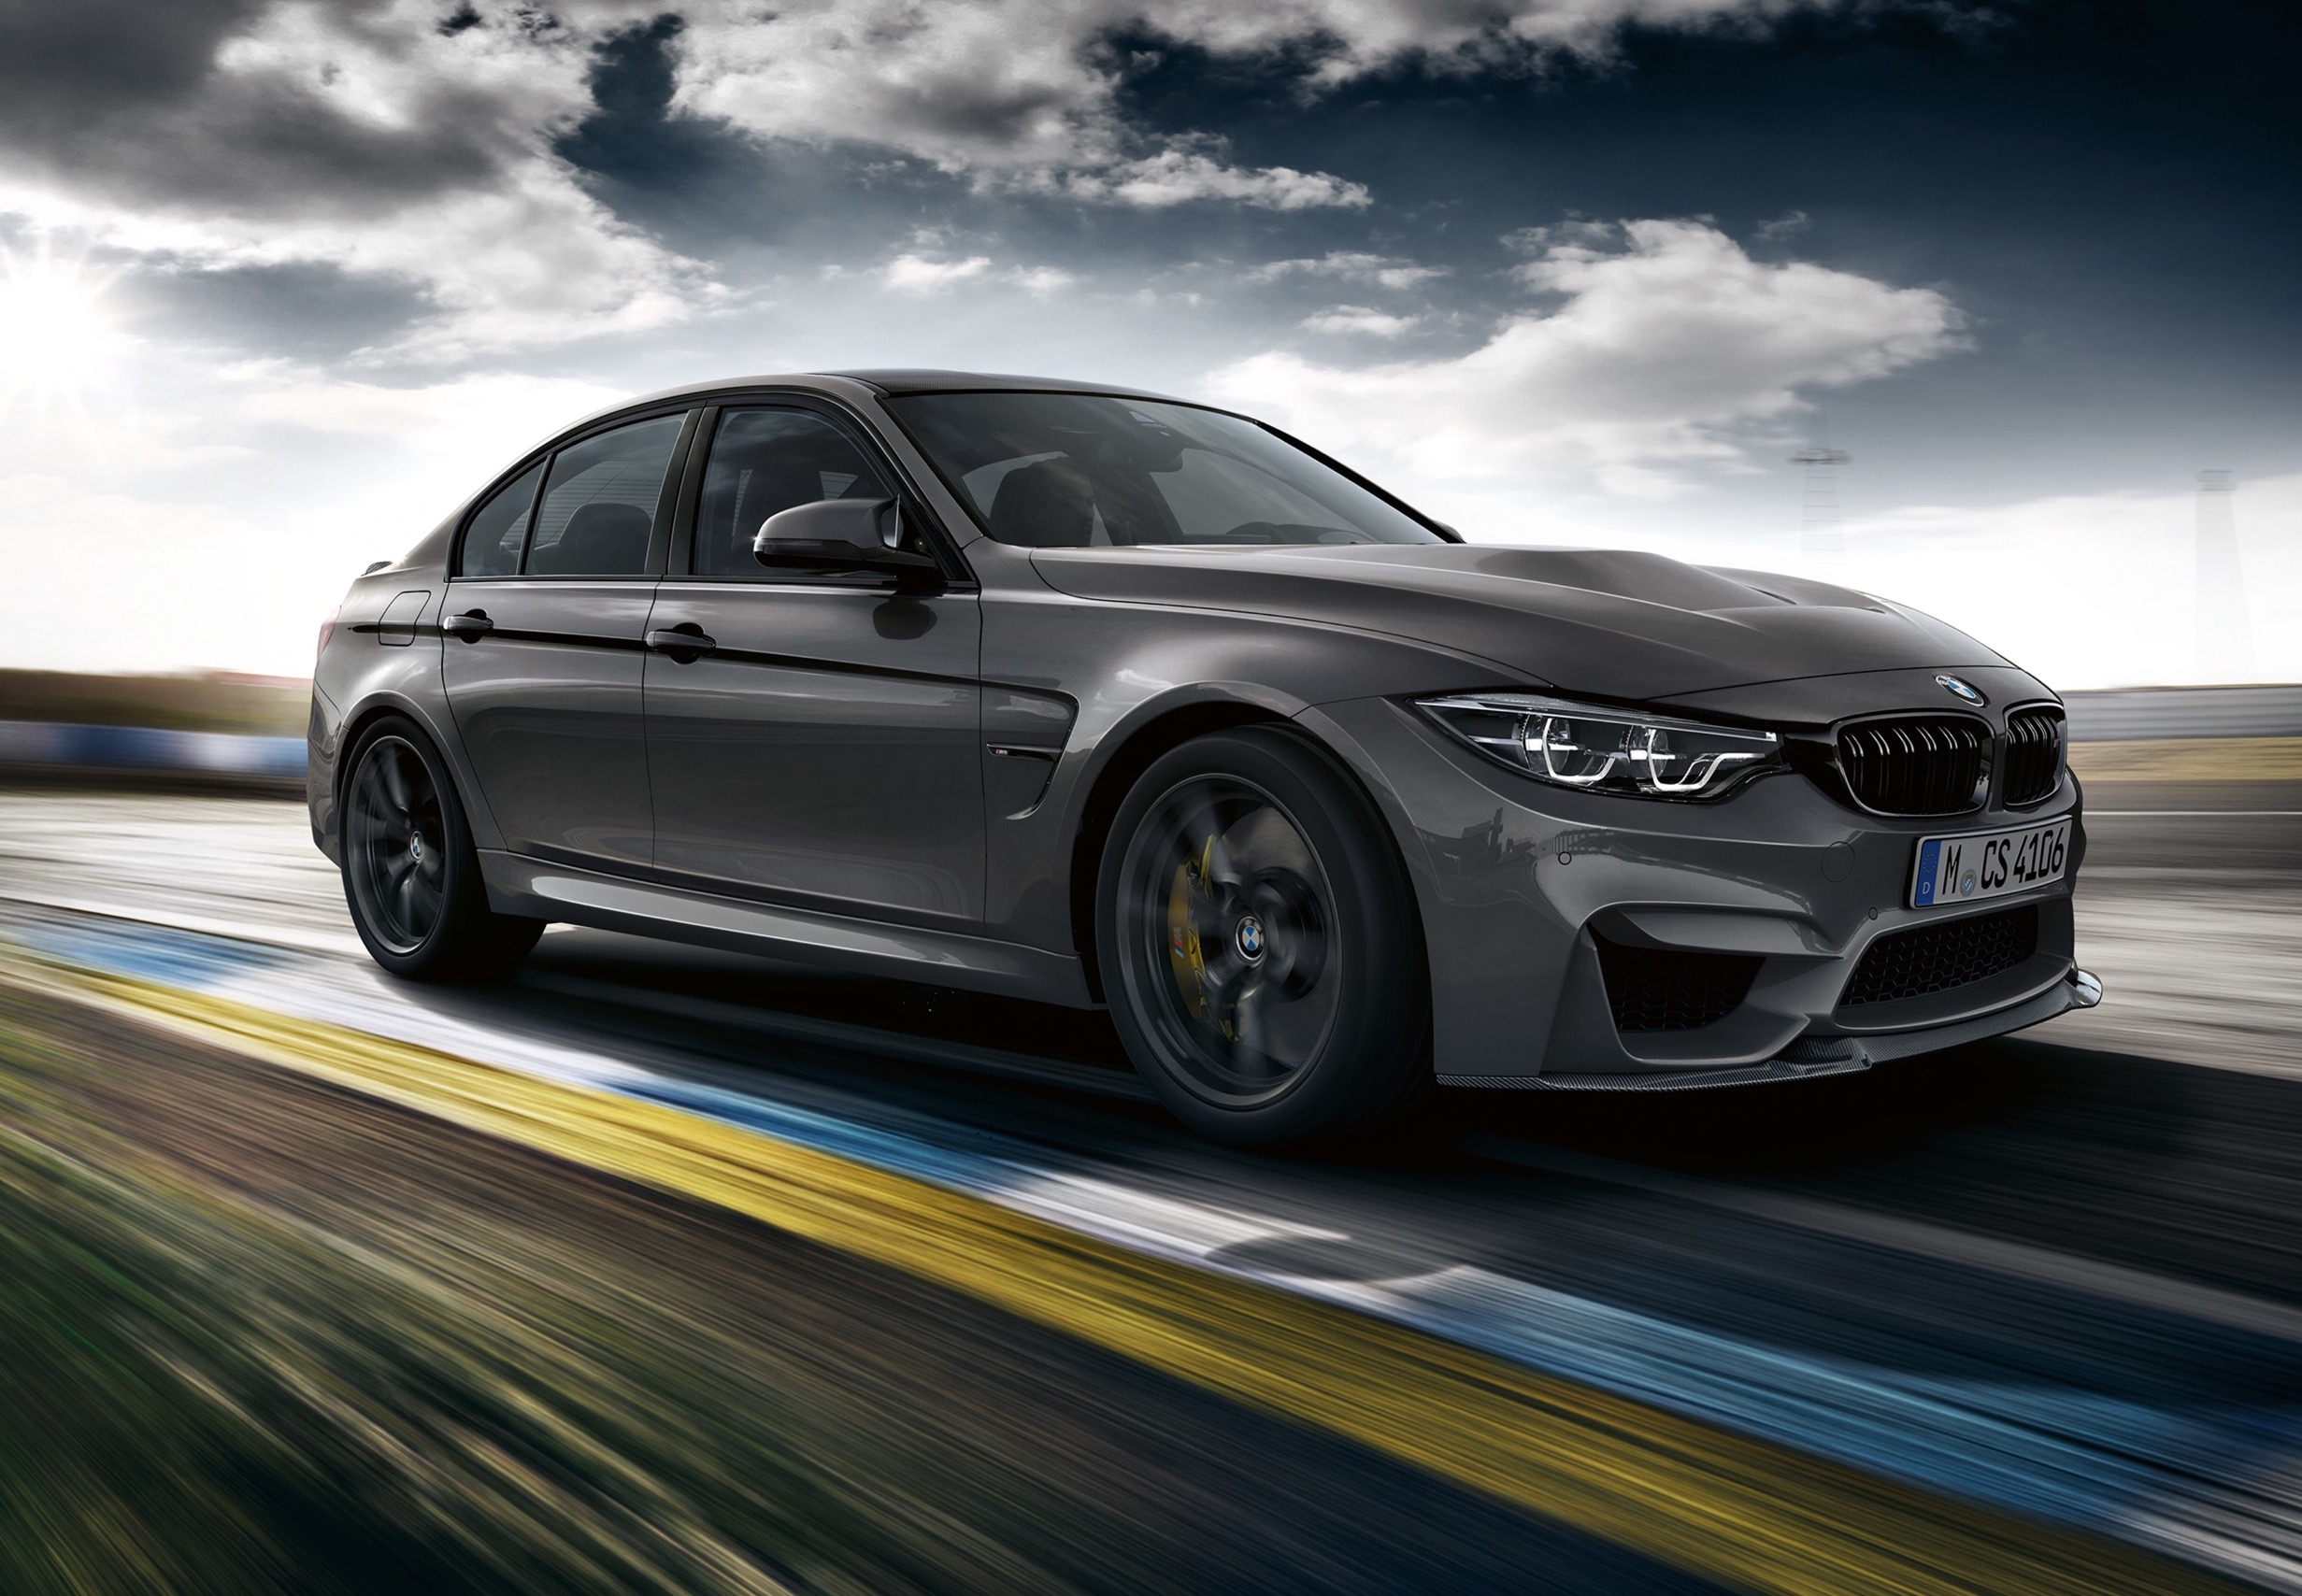 2018 BMW M3 CS on sale in Australia from 179,900, arrives June